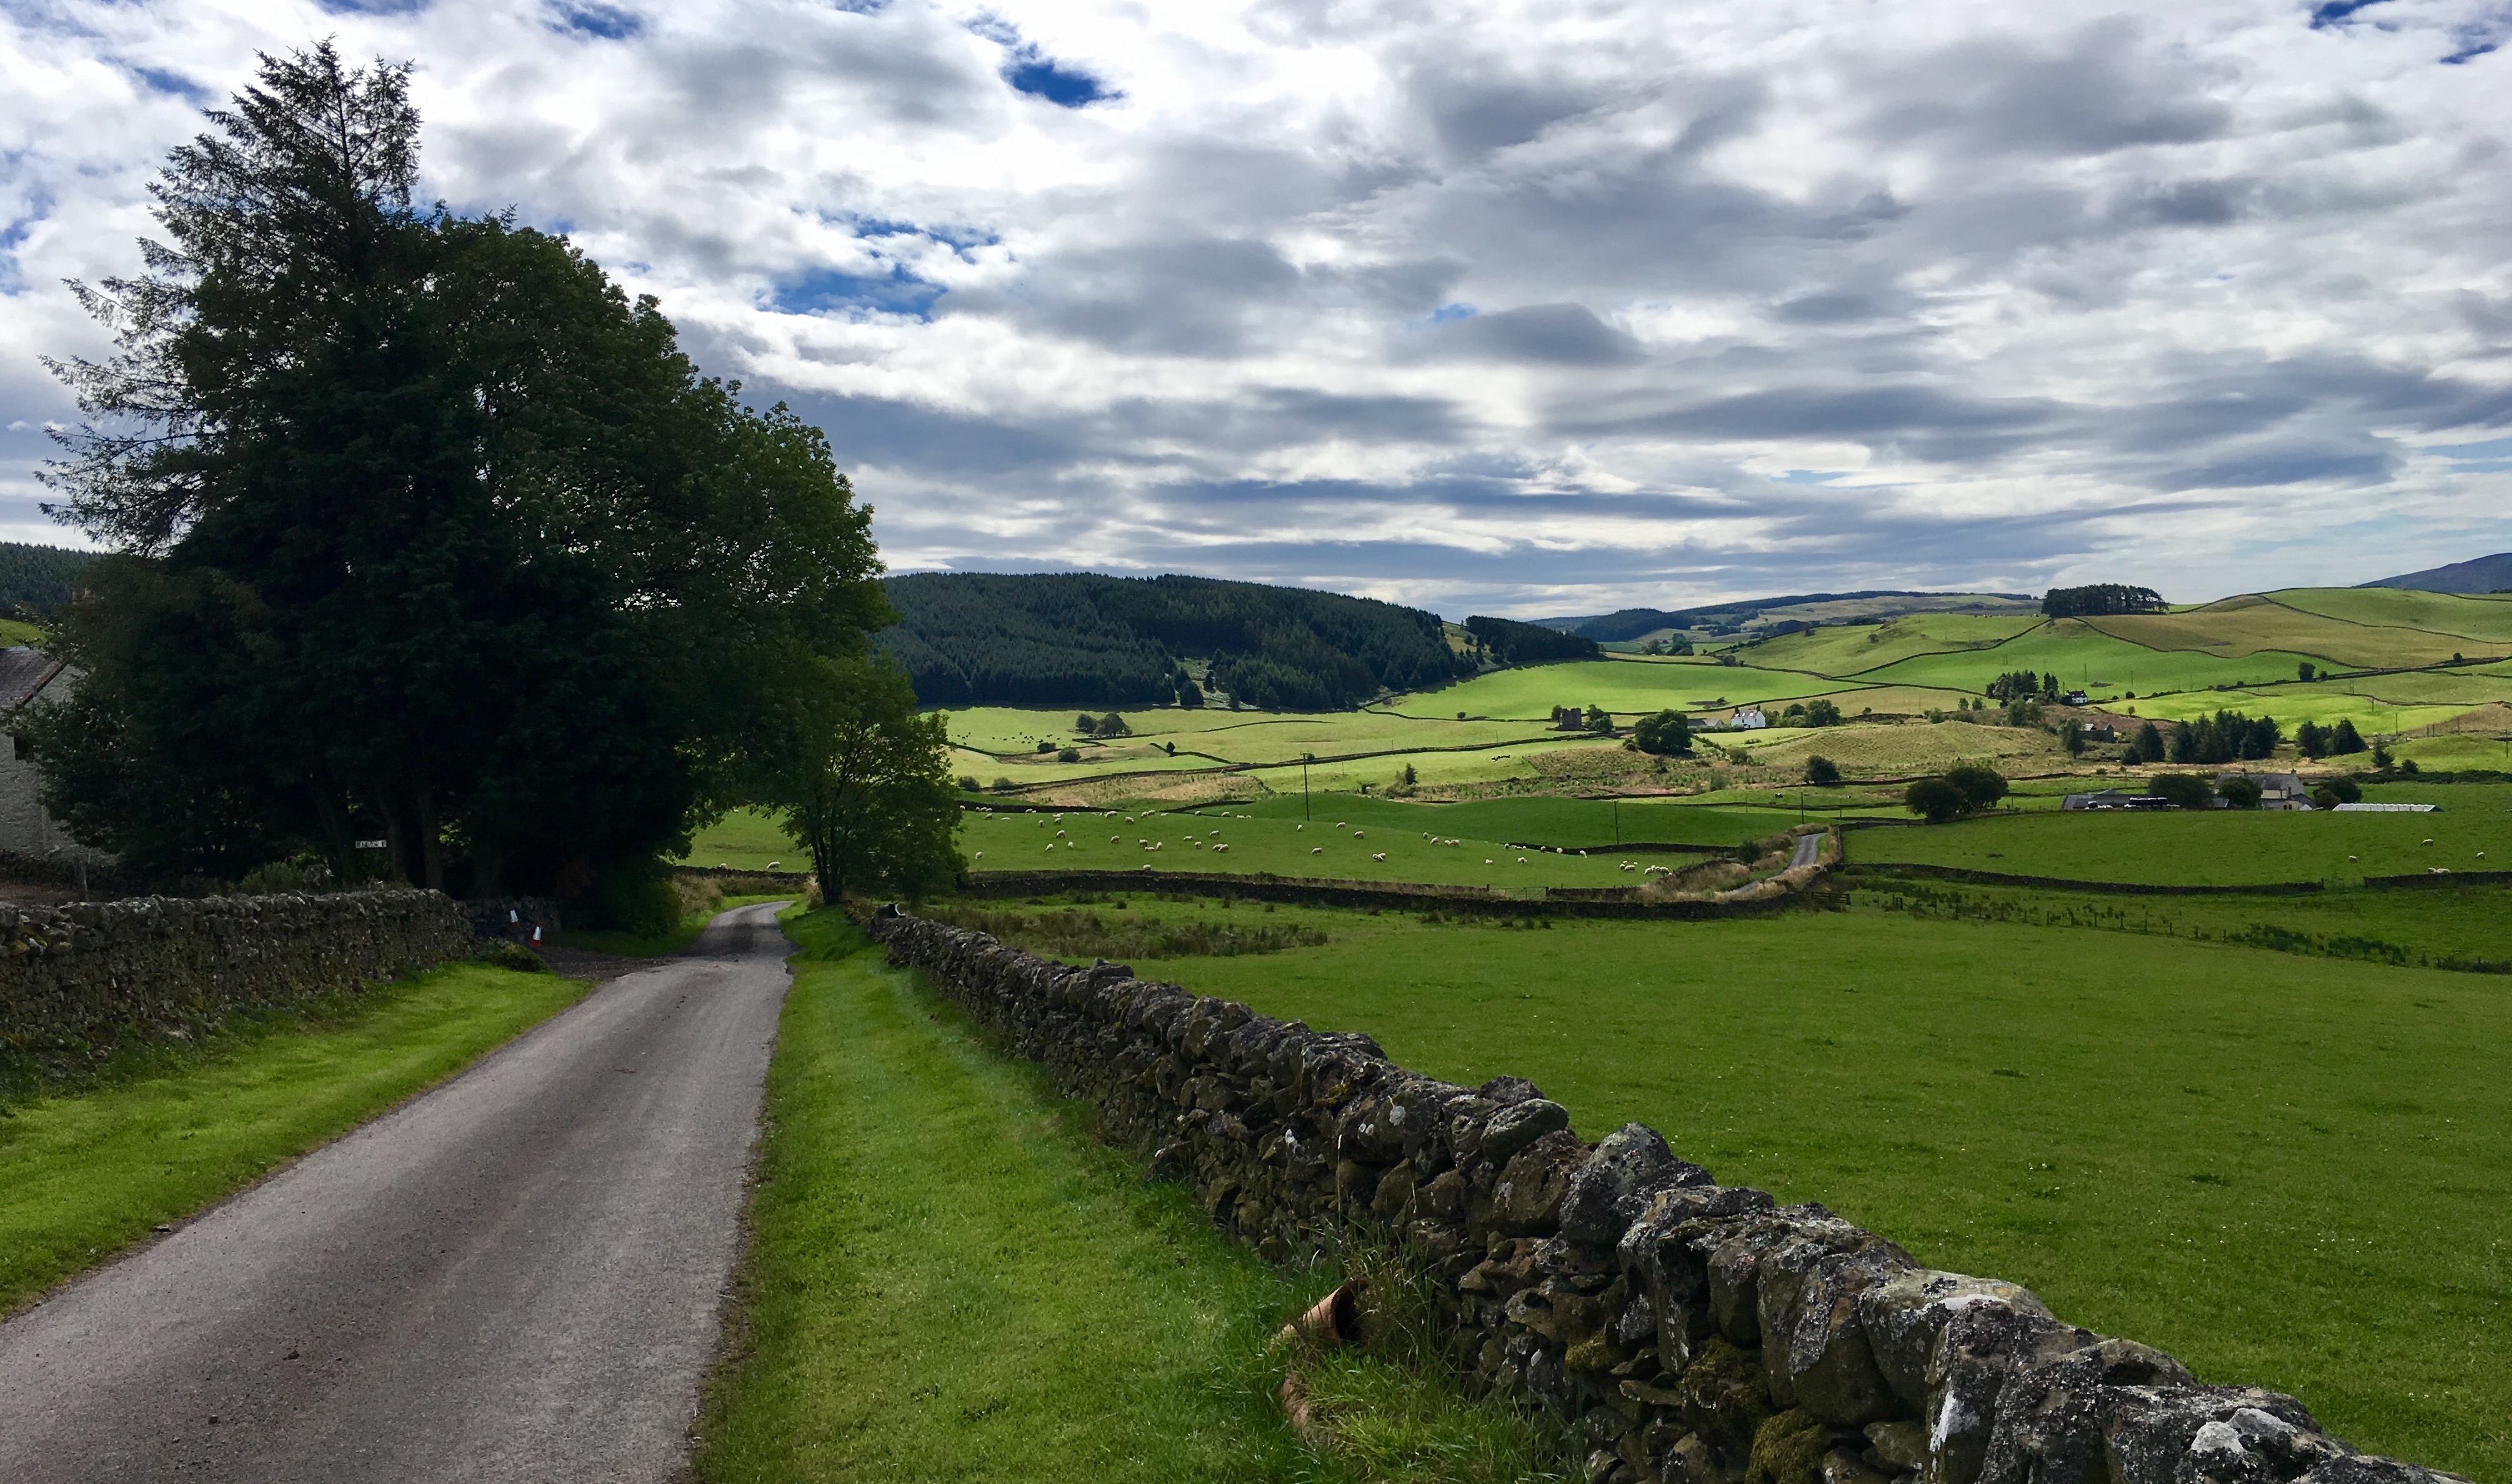 Countryside view from Auldgirth, during the Southern Uplands Audax 2017